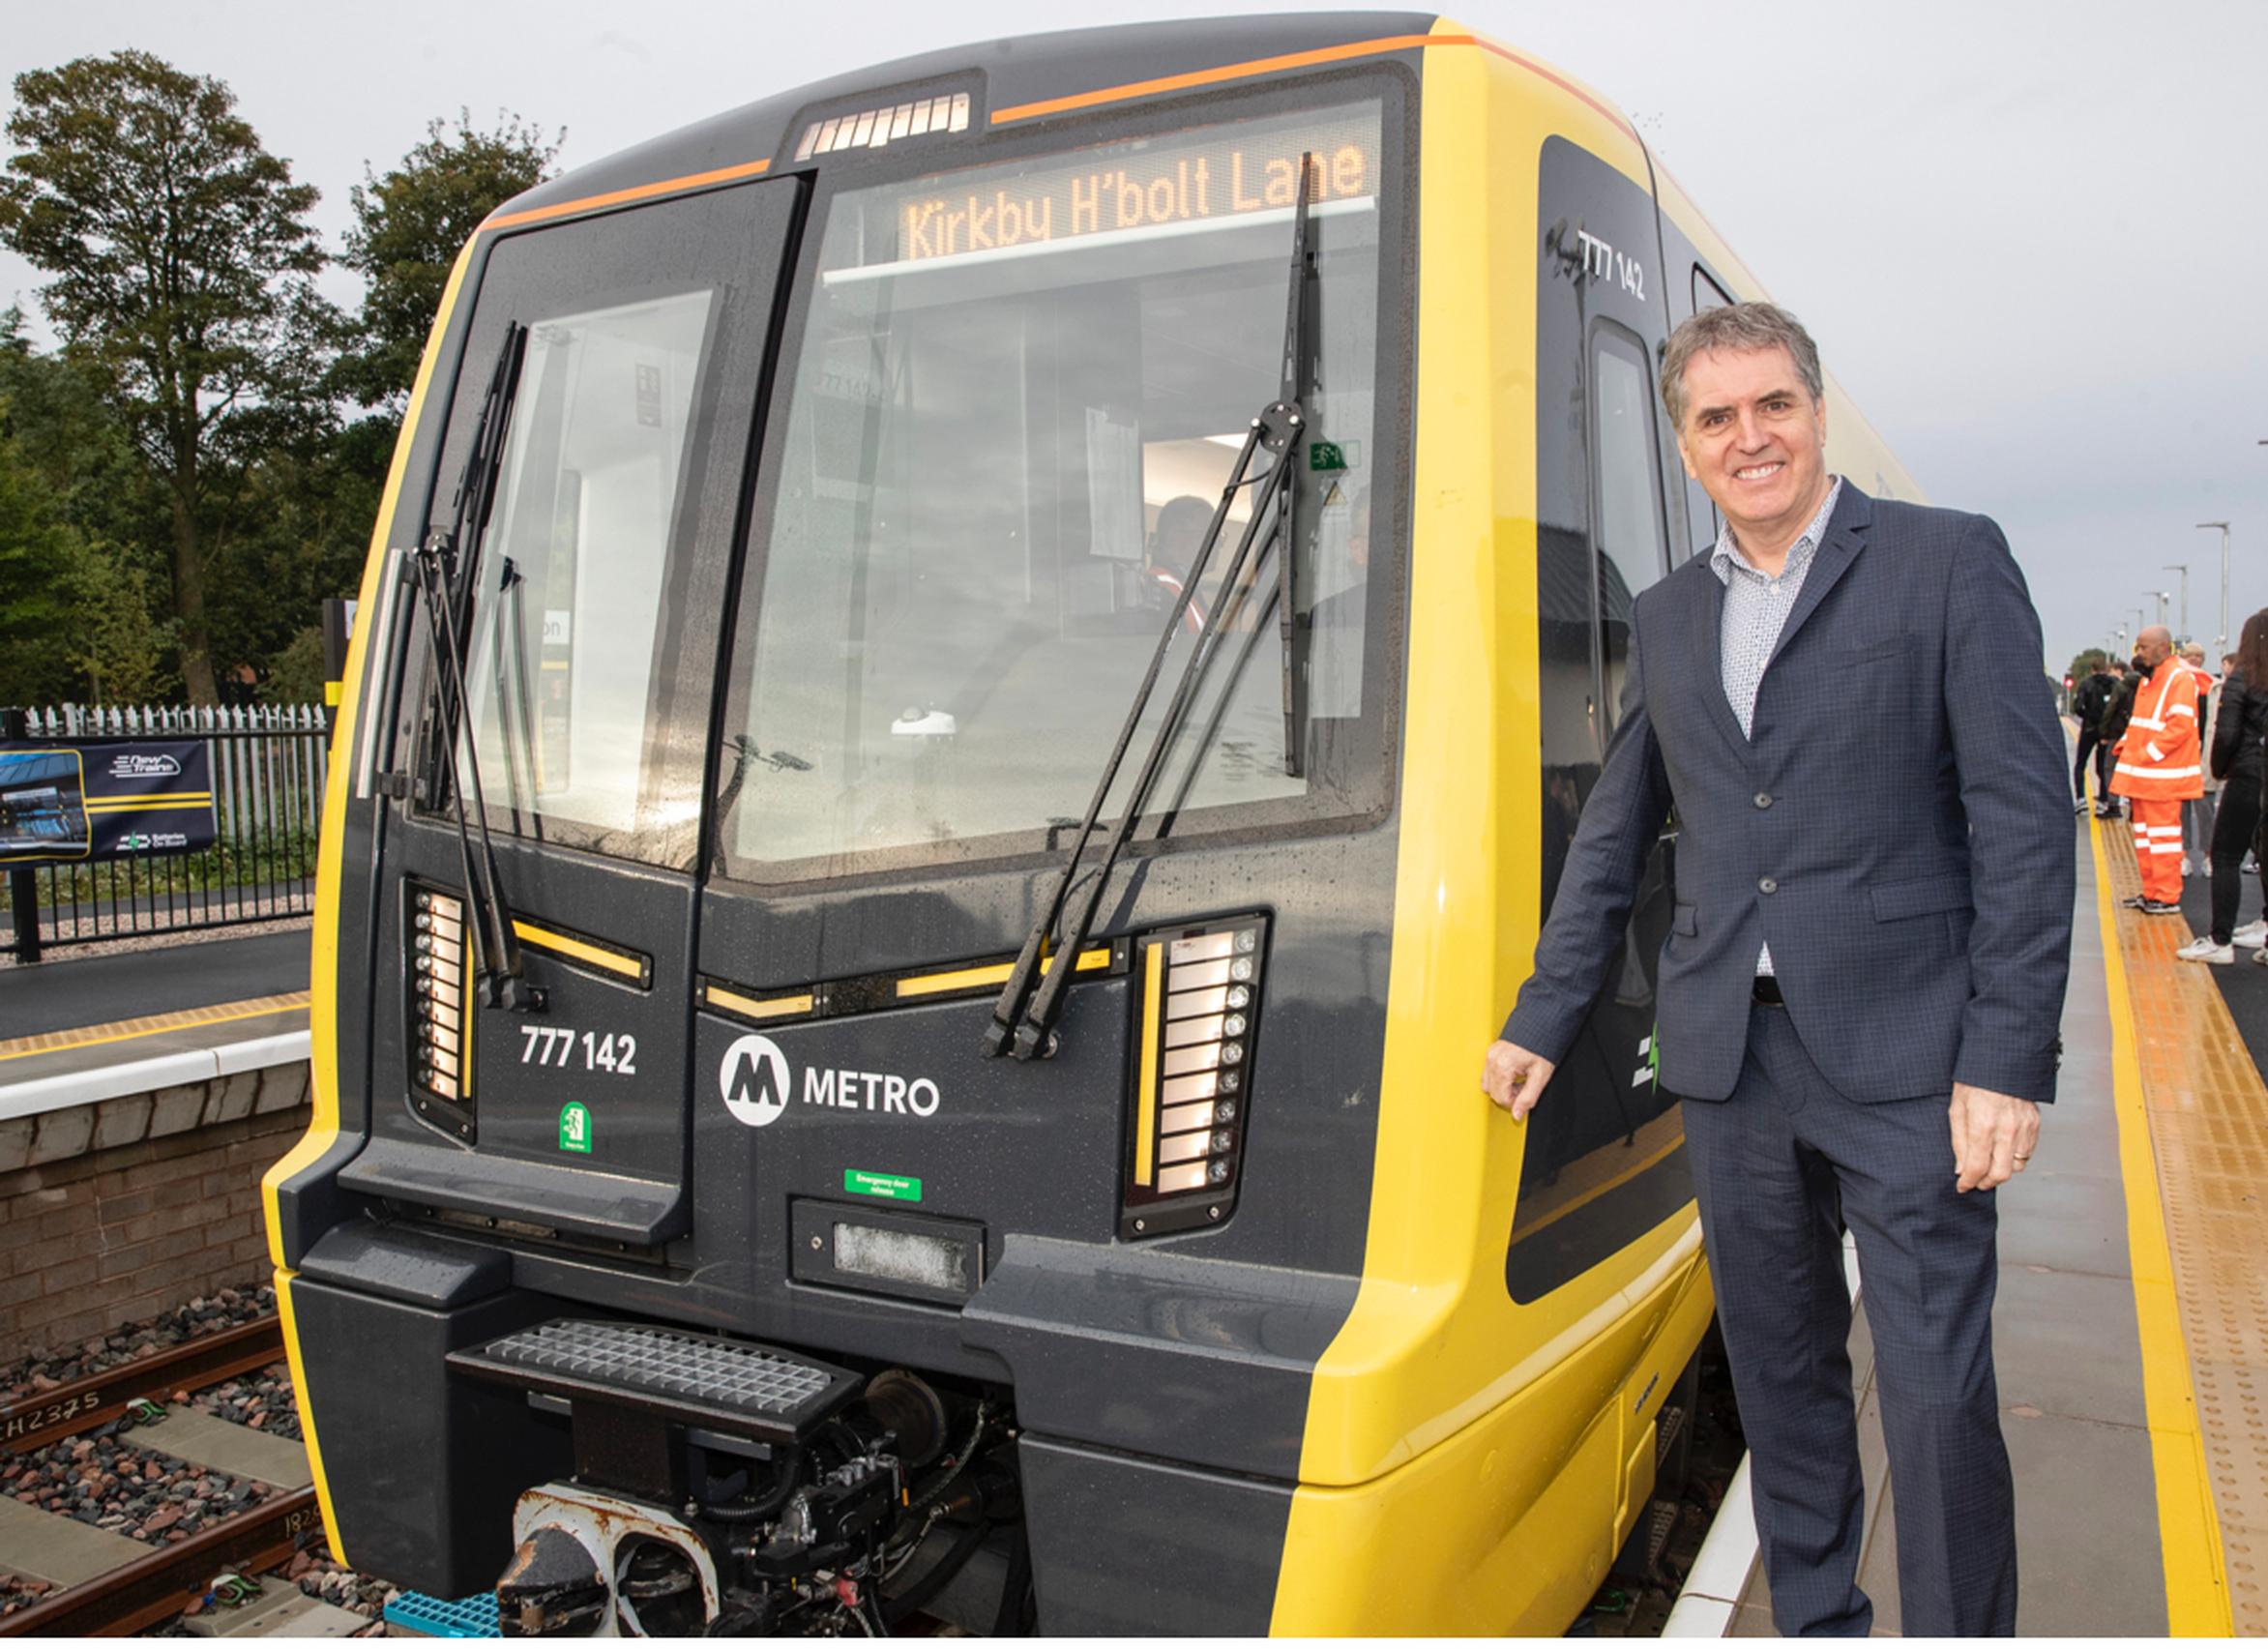 Liverpool City Region mayor Steve Rotheram with one of the Battery powered class 777 trains